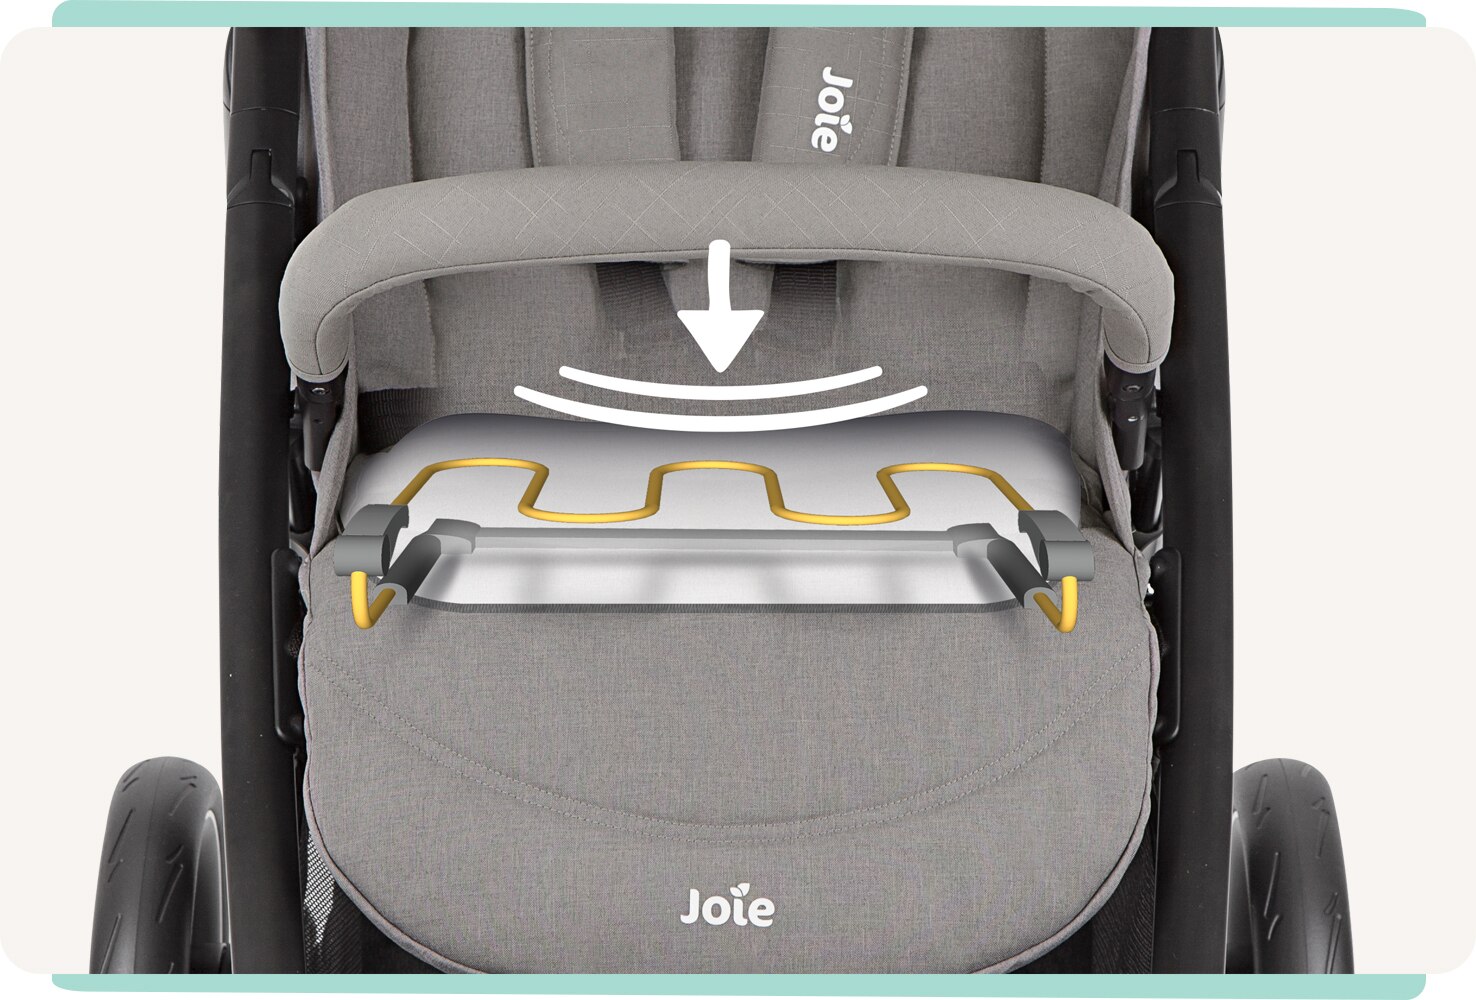 JoIe gray litetrax stroller with an illustration of a spring within the seat. 